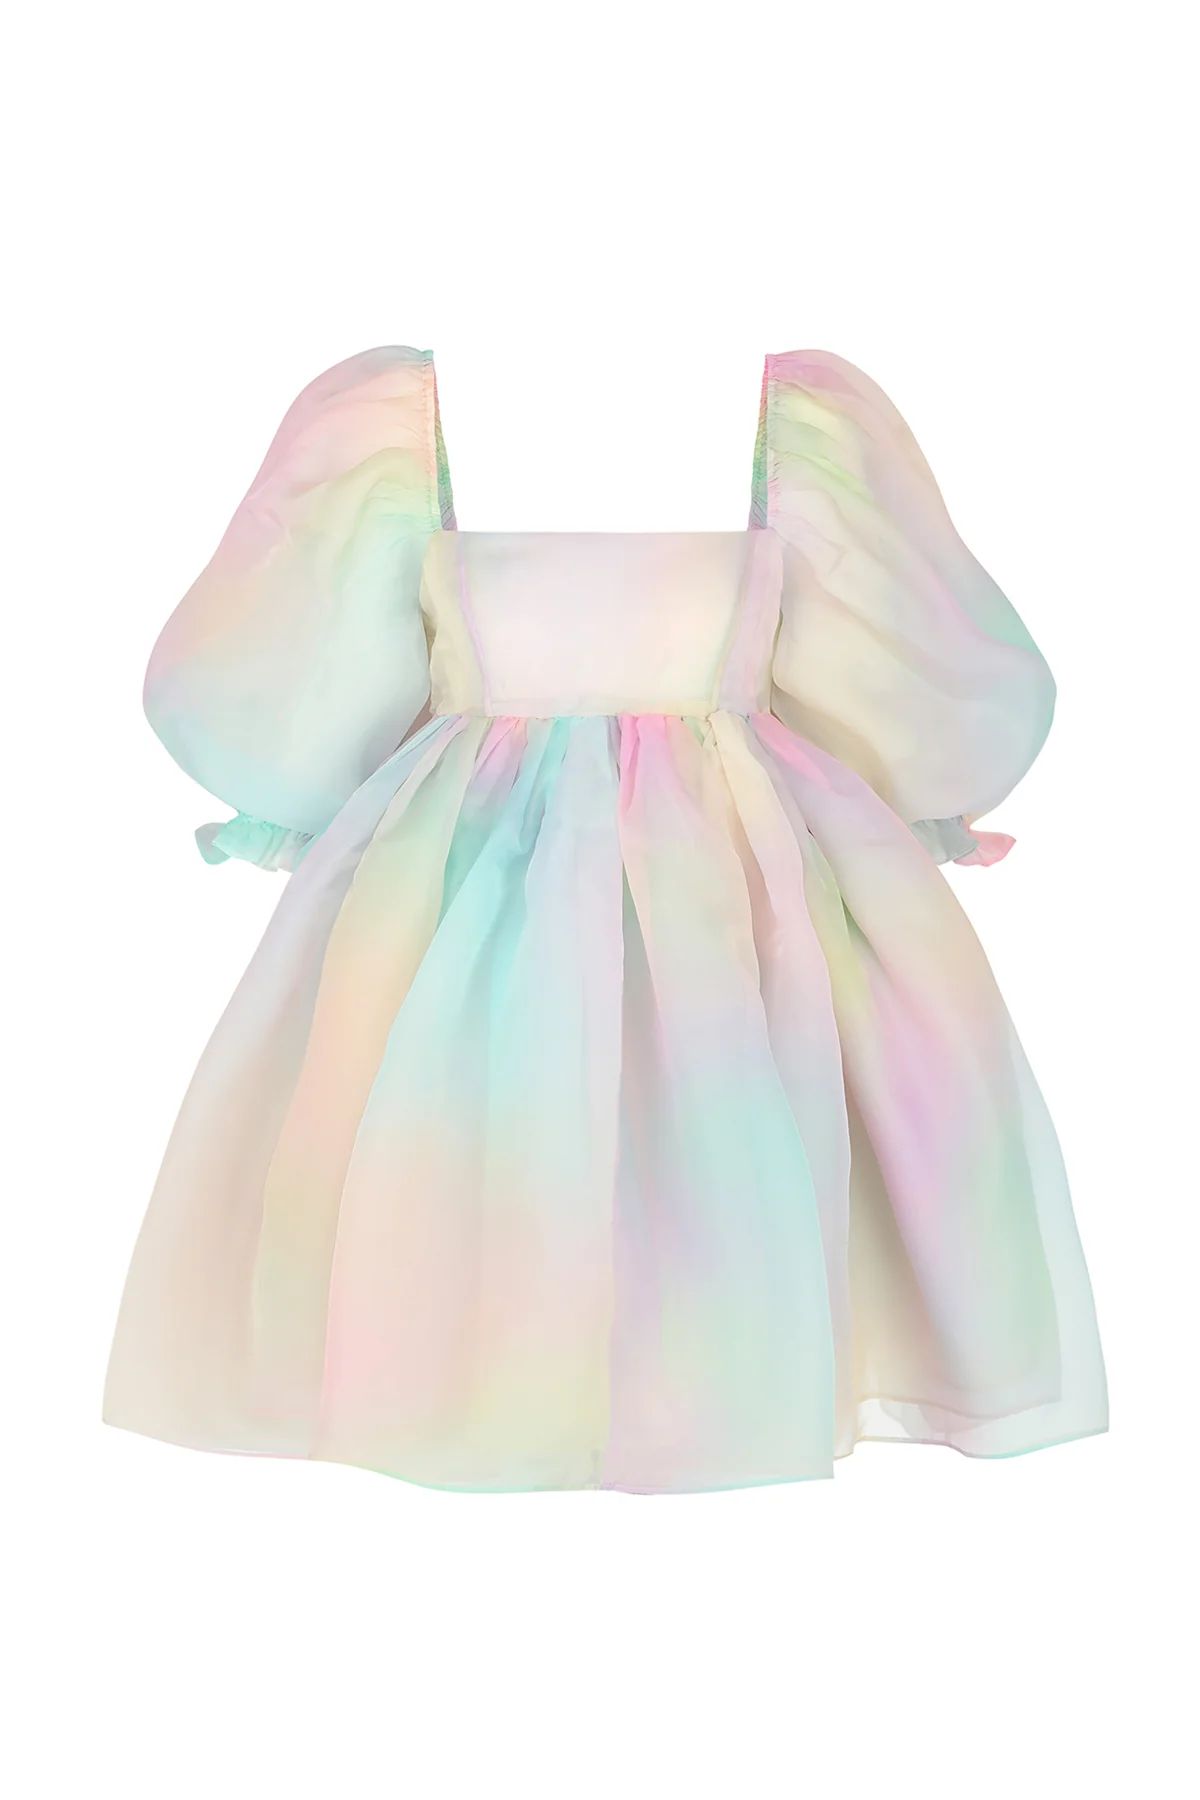 The Rainbow Puff Dress | Selkie Collection